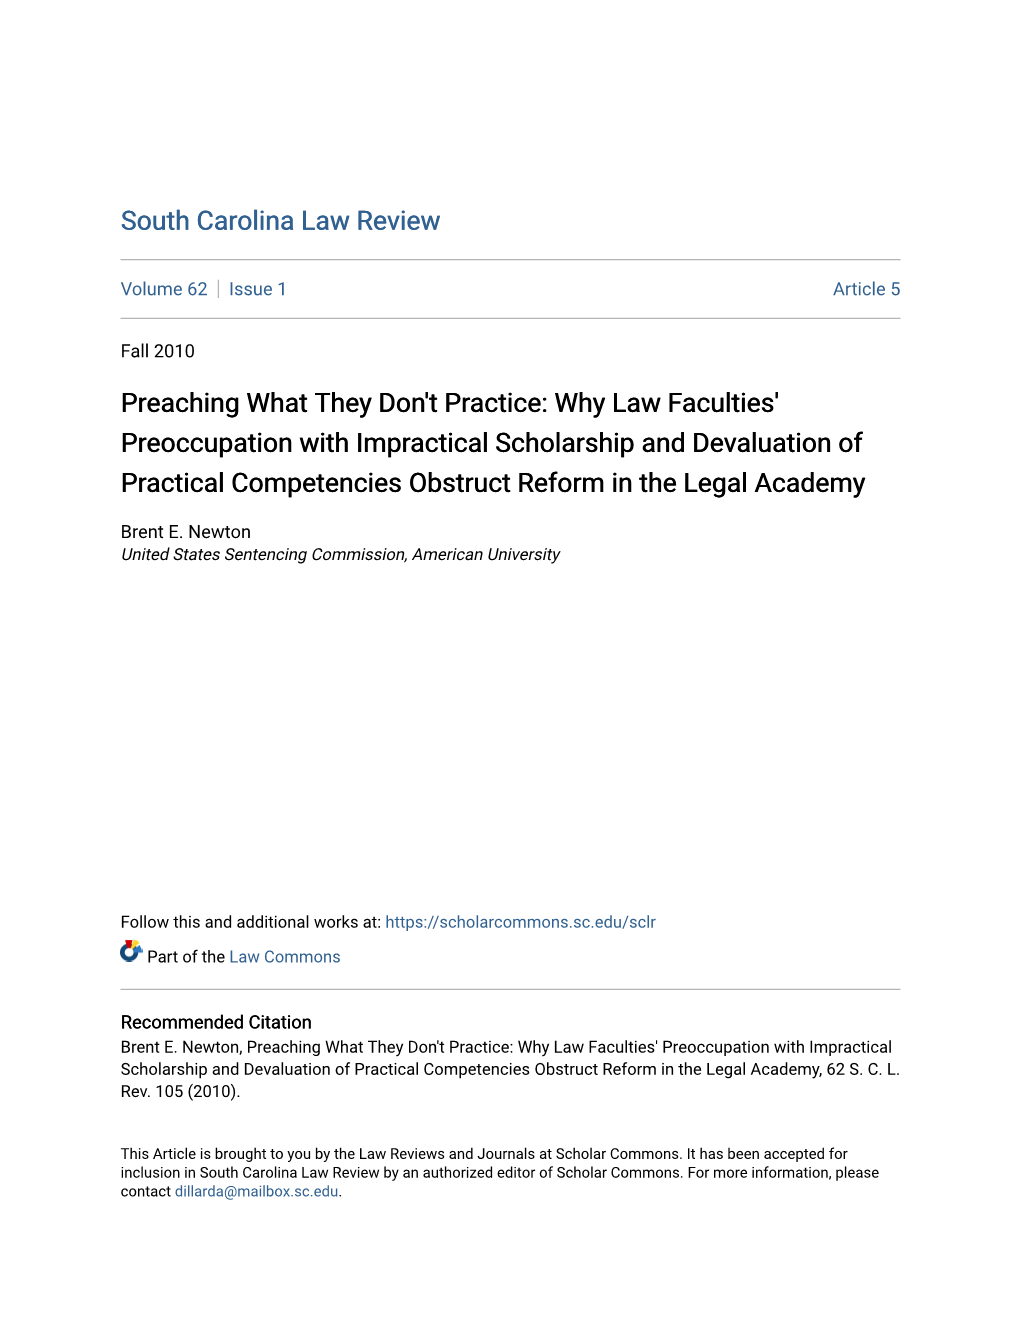 Preaching What They Don't Practice: Why Law Faculties' Preoccupation